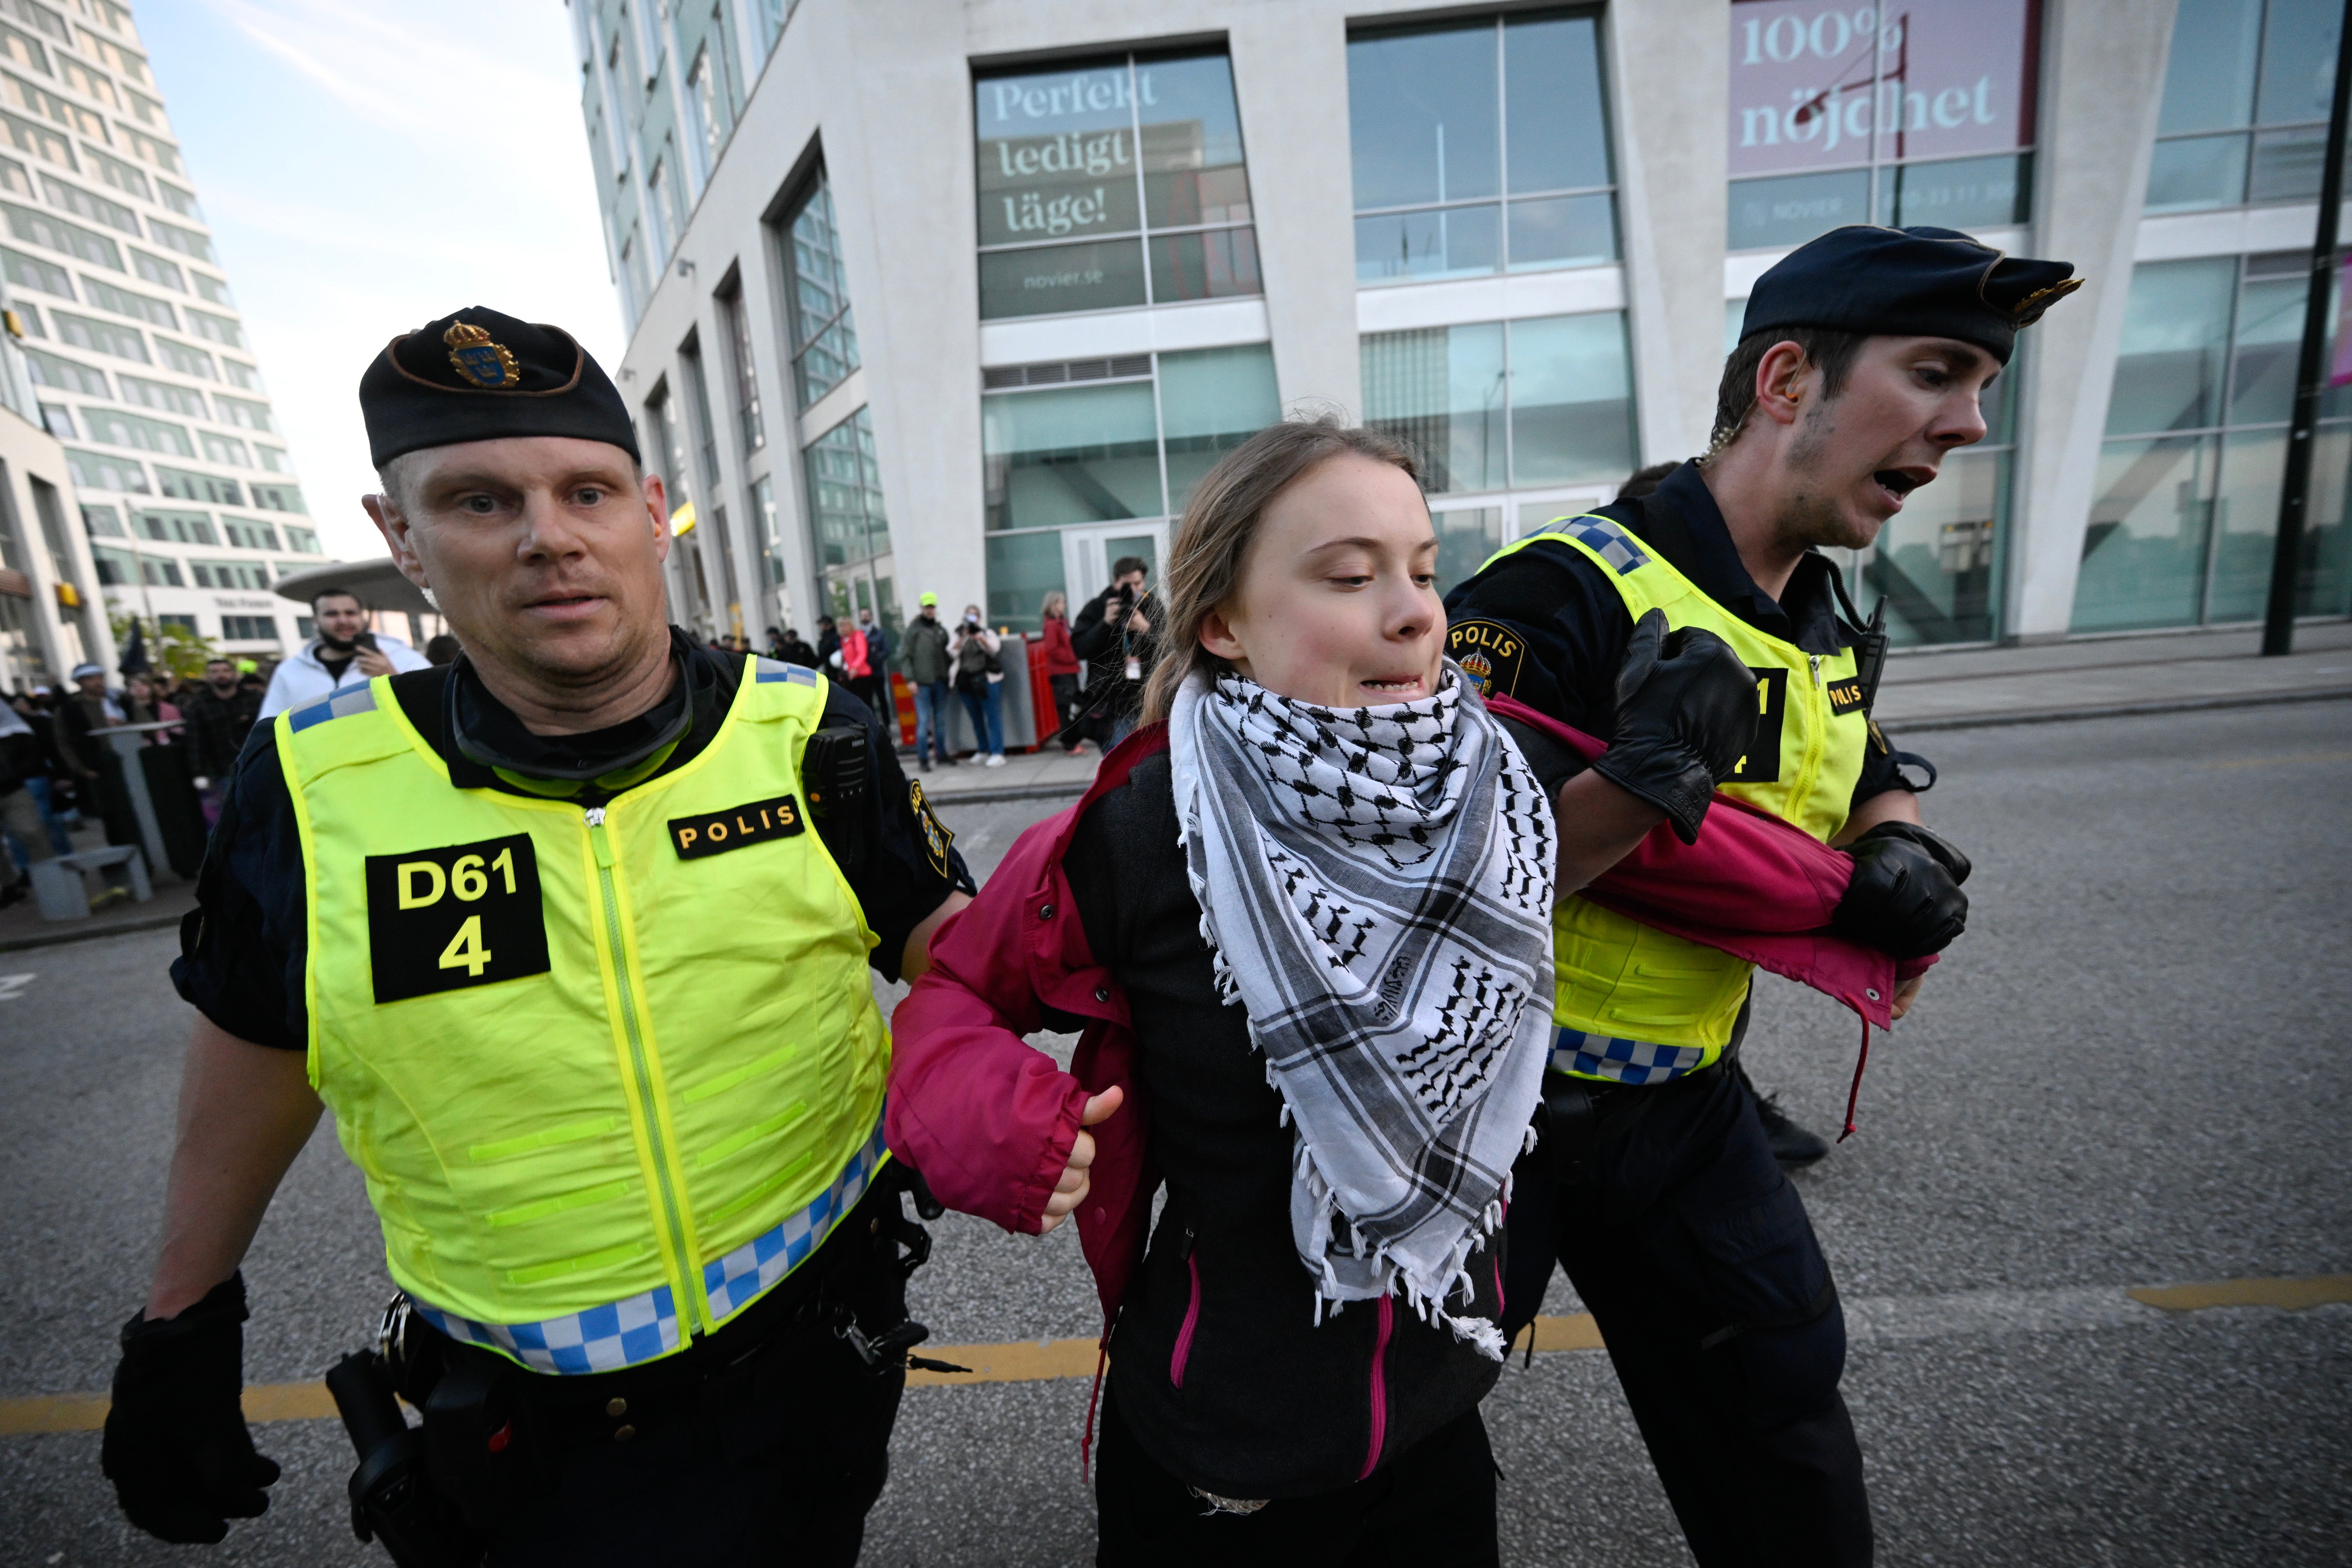 Greta Thunberg being removed from outside the Malmo Arena by Swedish police